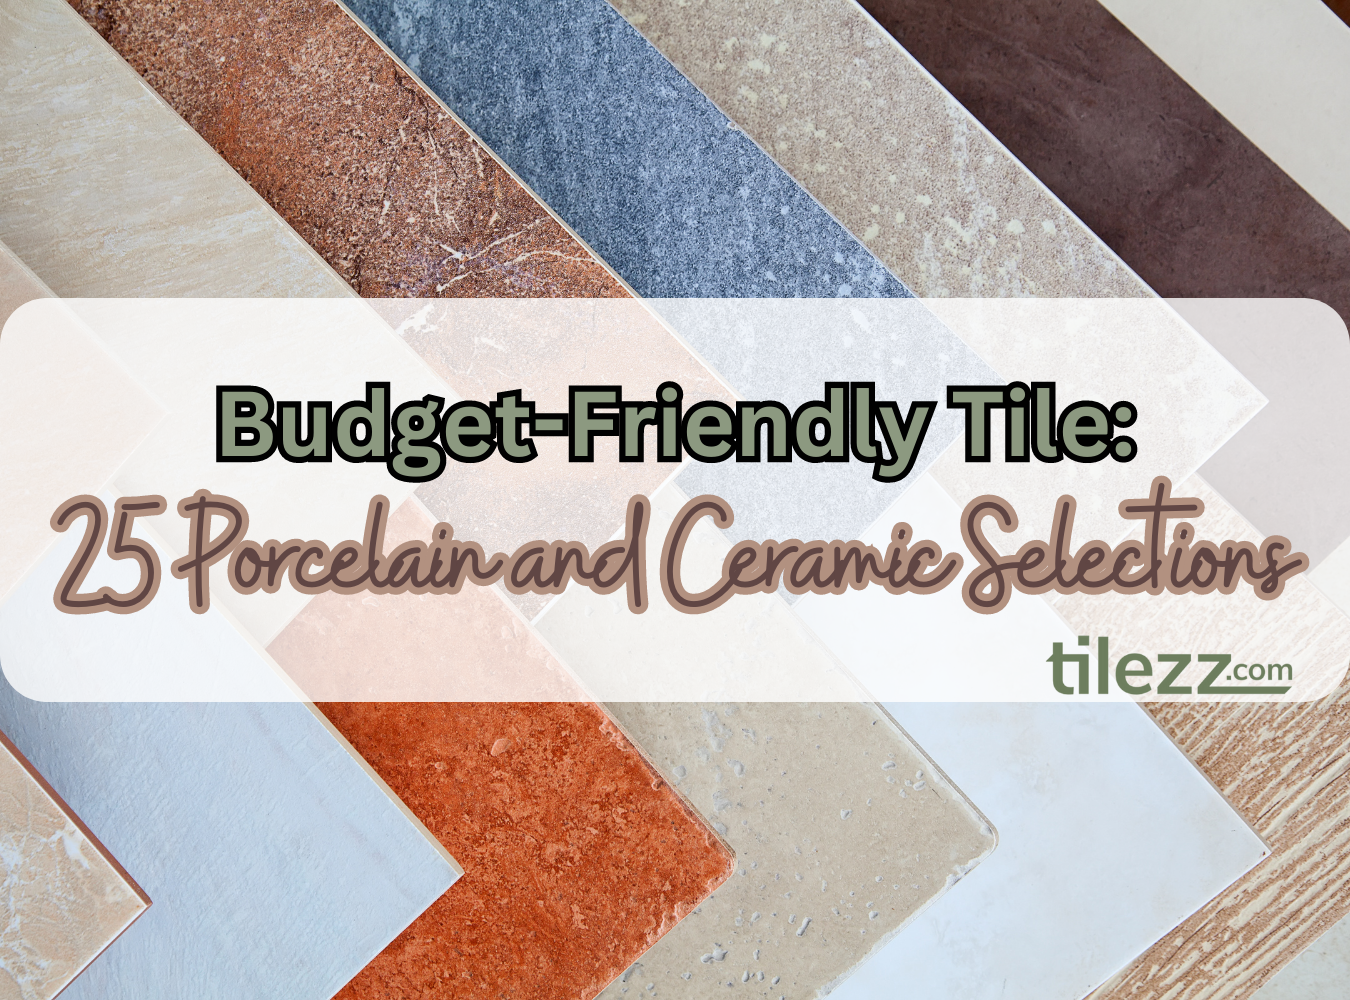 Budget-Friendly Tile: 25 Porcelain and Ceramic Selections (Less Than $10 per Square Foot!)